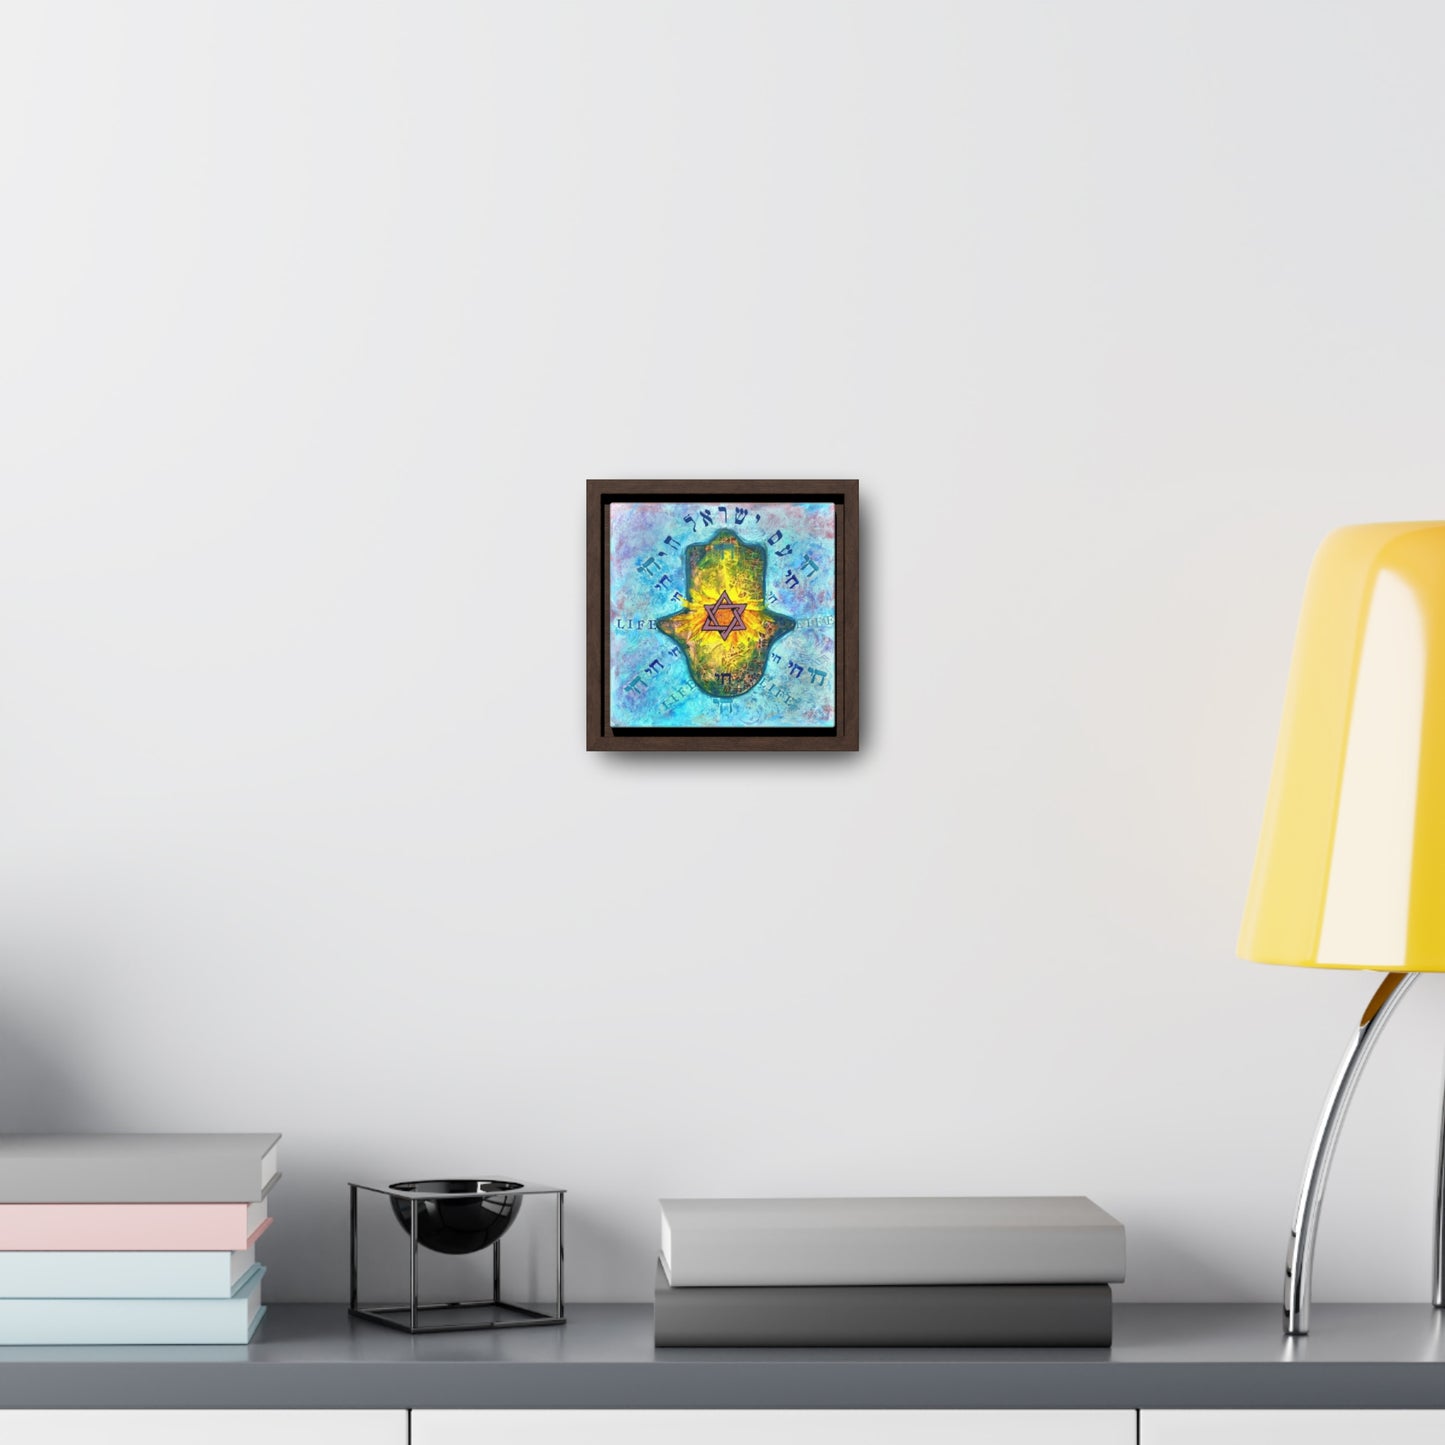 Am Yisrael Chai Hamsa by Esther Cohen - Gallery Wrapped Canvas Print in Frame